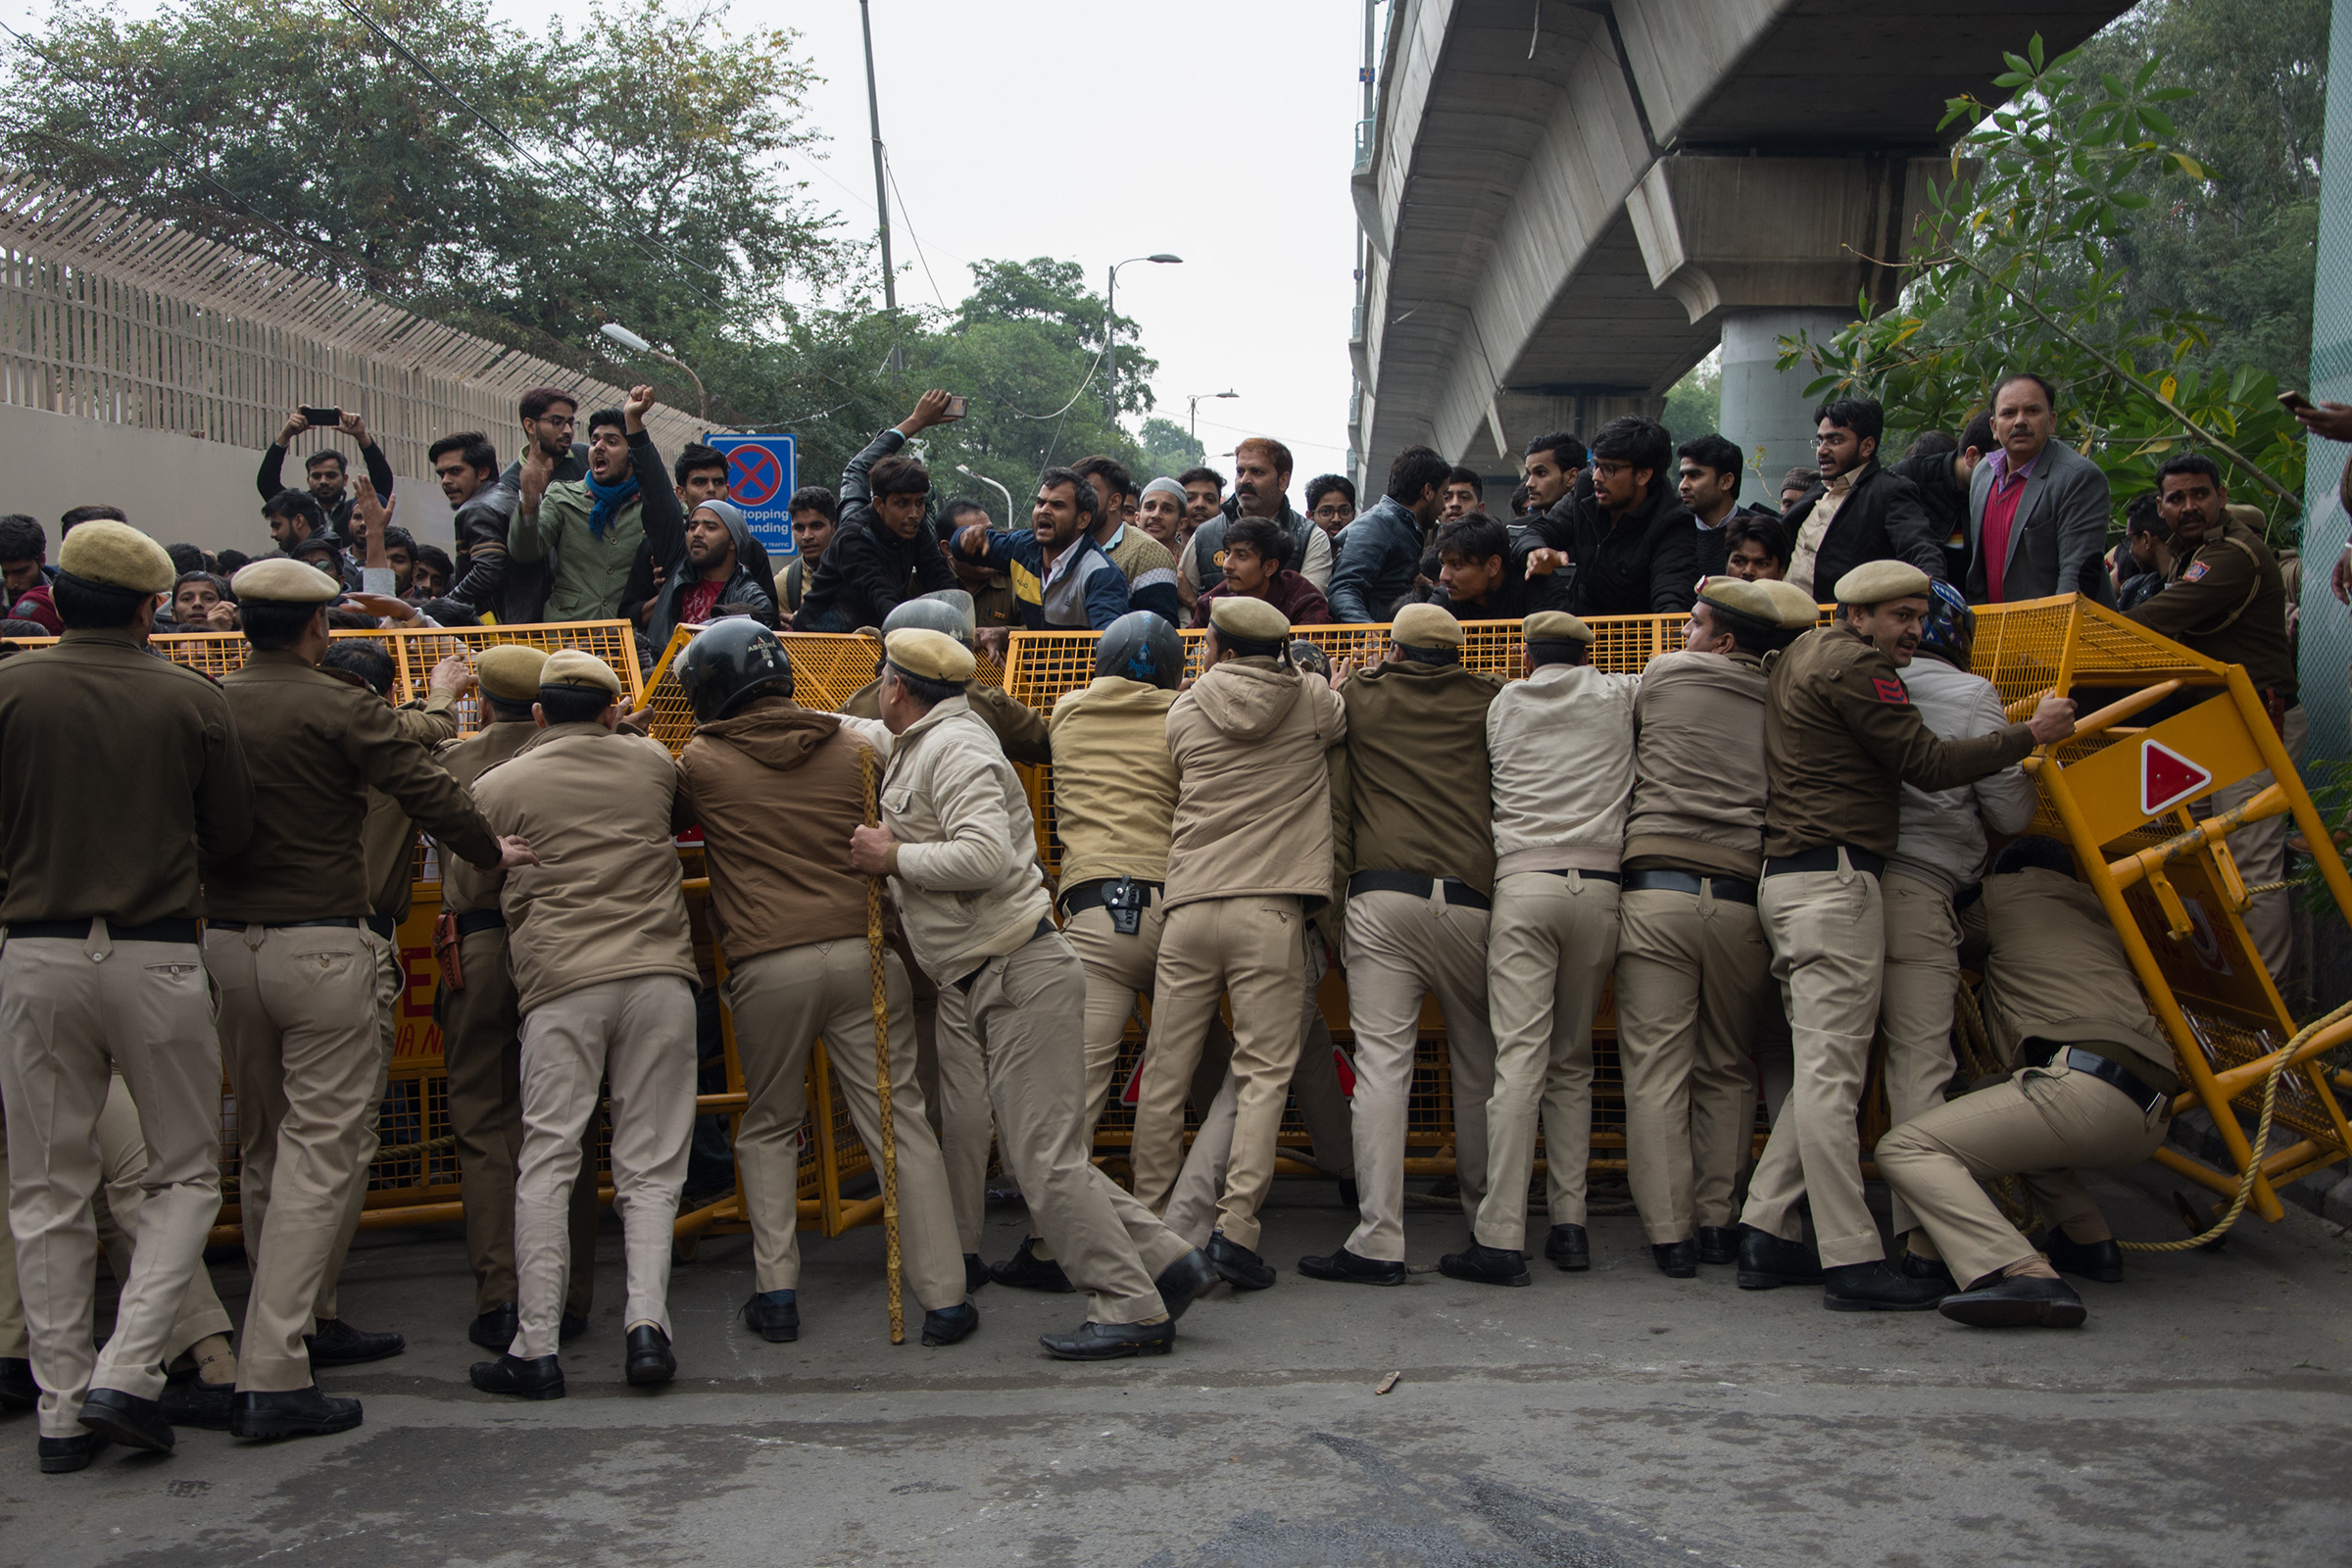 Protests against the controversial Citizenship Amendment Act turned violent when Delhi Police shot tear gas and beat students at Jamia Millia Islamia University in Delhi, India on Dec. 13, 2019. (Javed Sultan—Anadolu Agency via Getty Images)